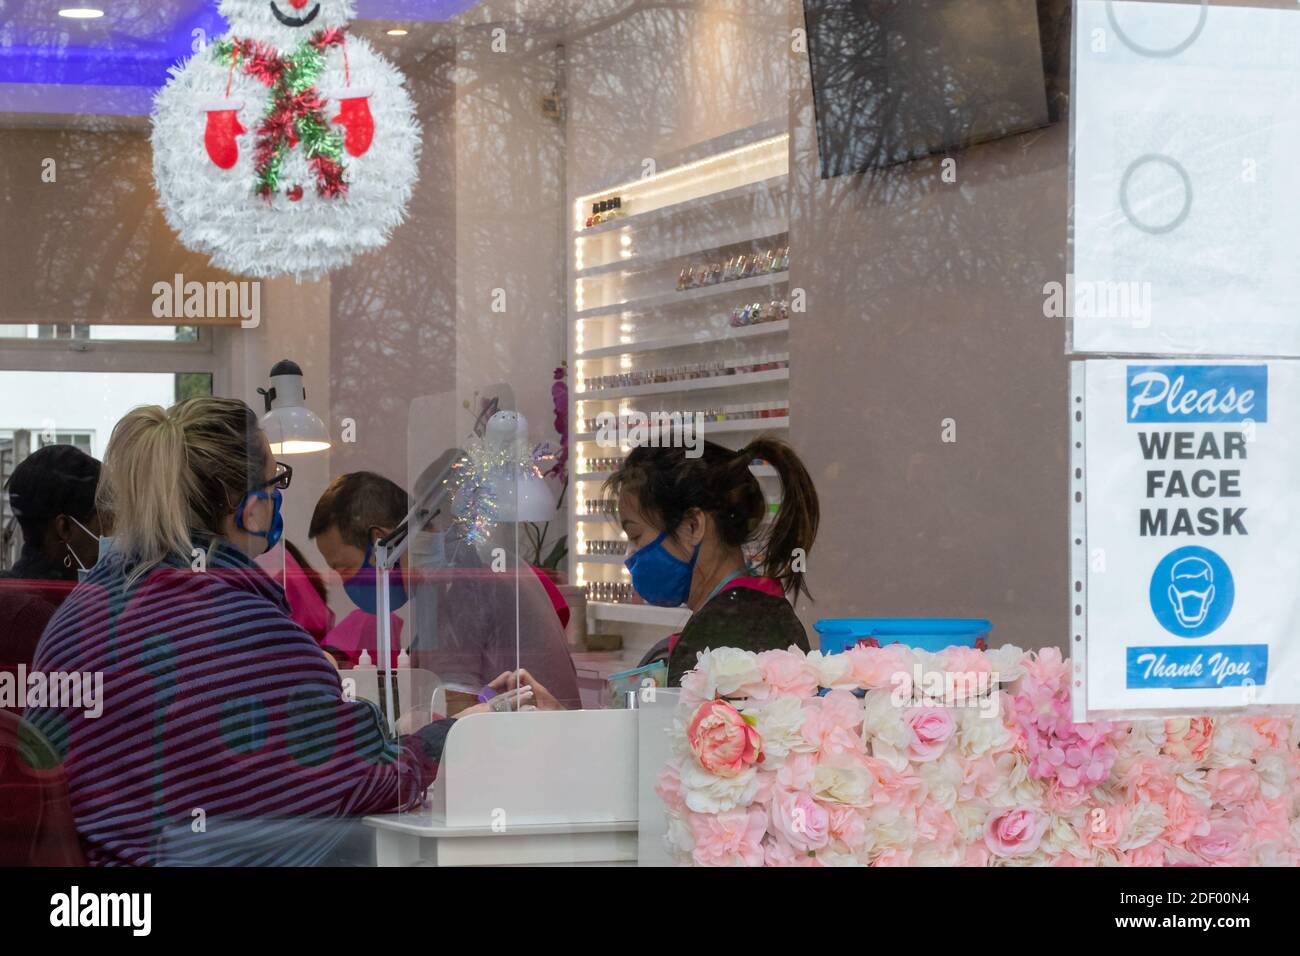 Nail bar with clients and staff working wearing face masks during the coronavirus covid-19 pandemic, December 2020, England, UK Stock Photo